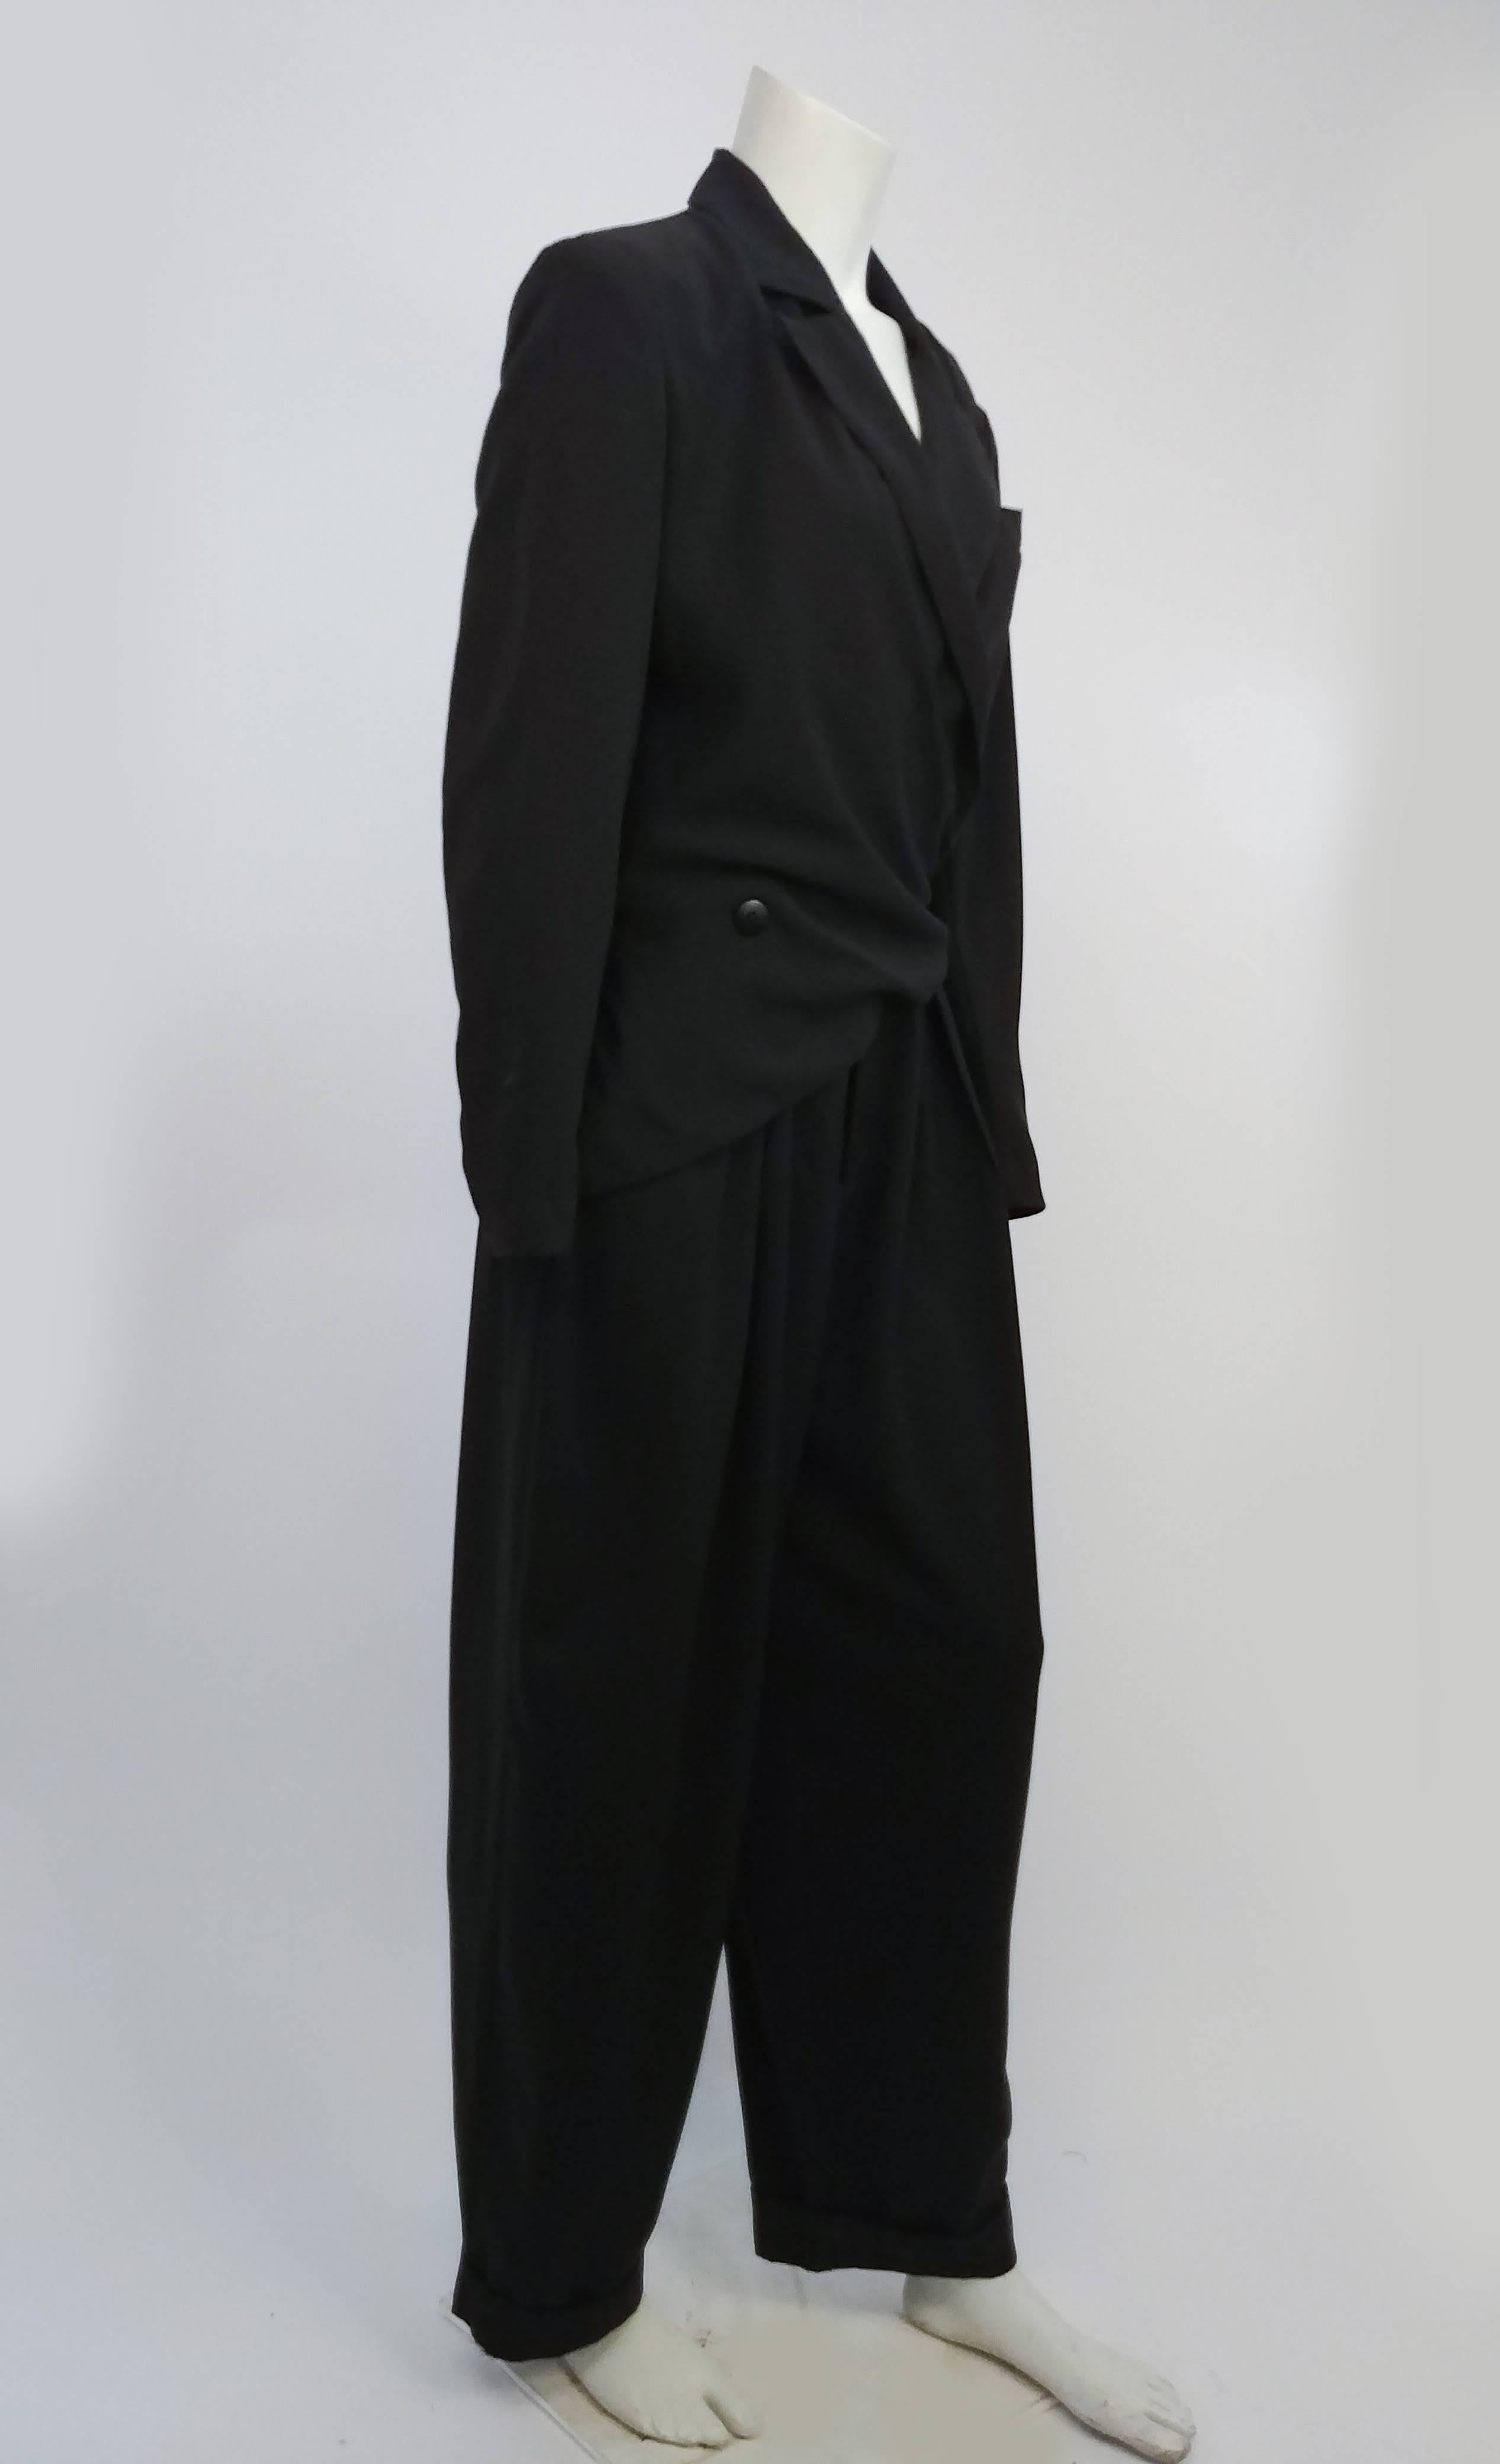 1980s Tuxedo Jumpsuit. Fullbody menswear-like jumpsuit, draped closure that buttons on side conceals zip on pants. 